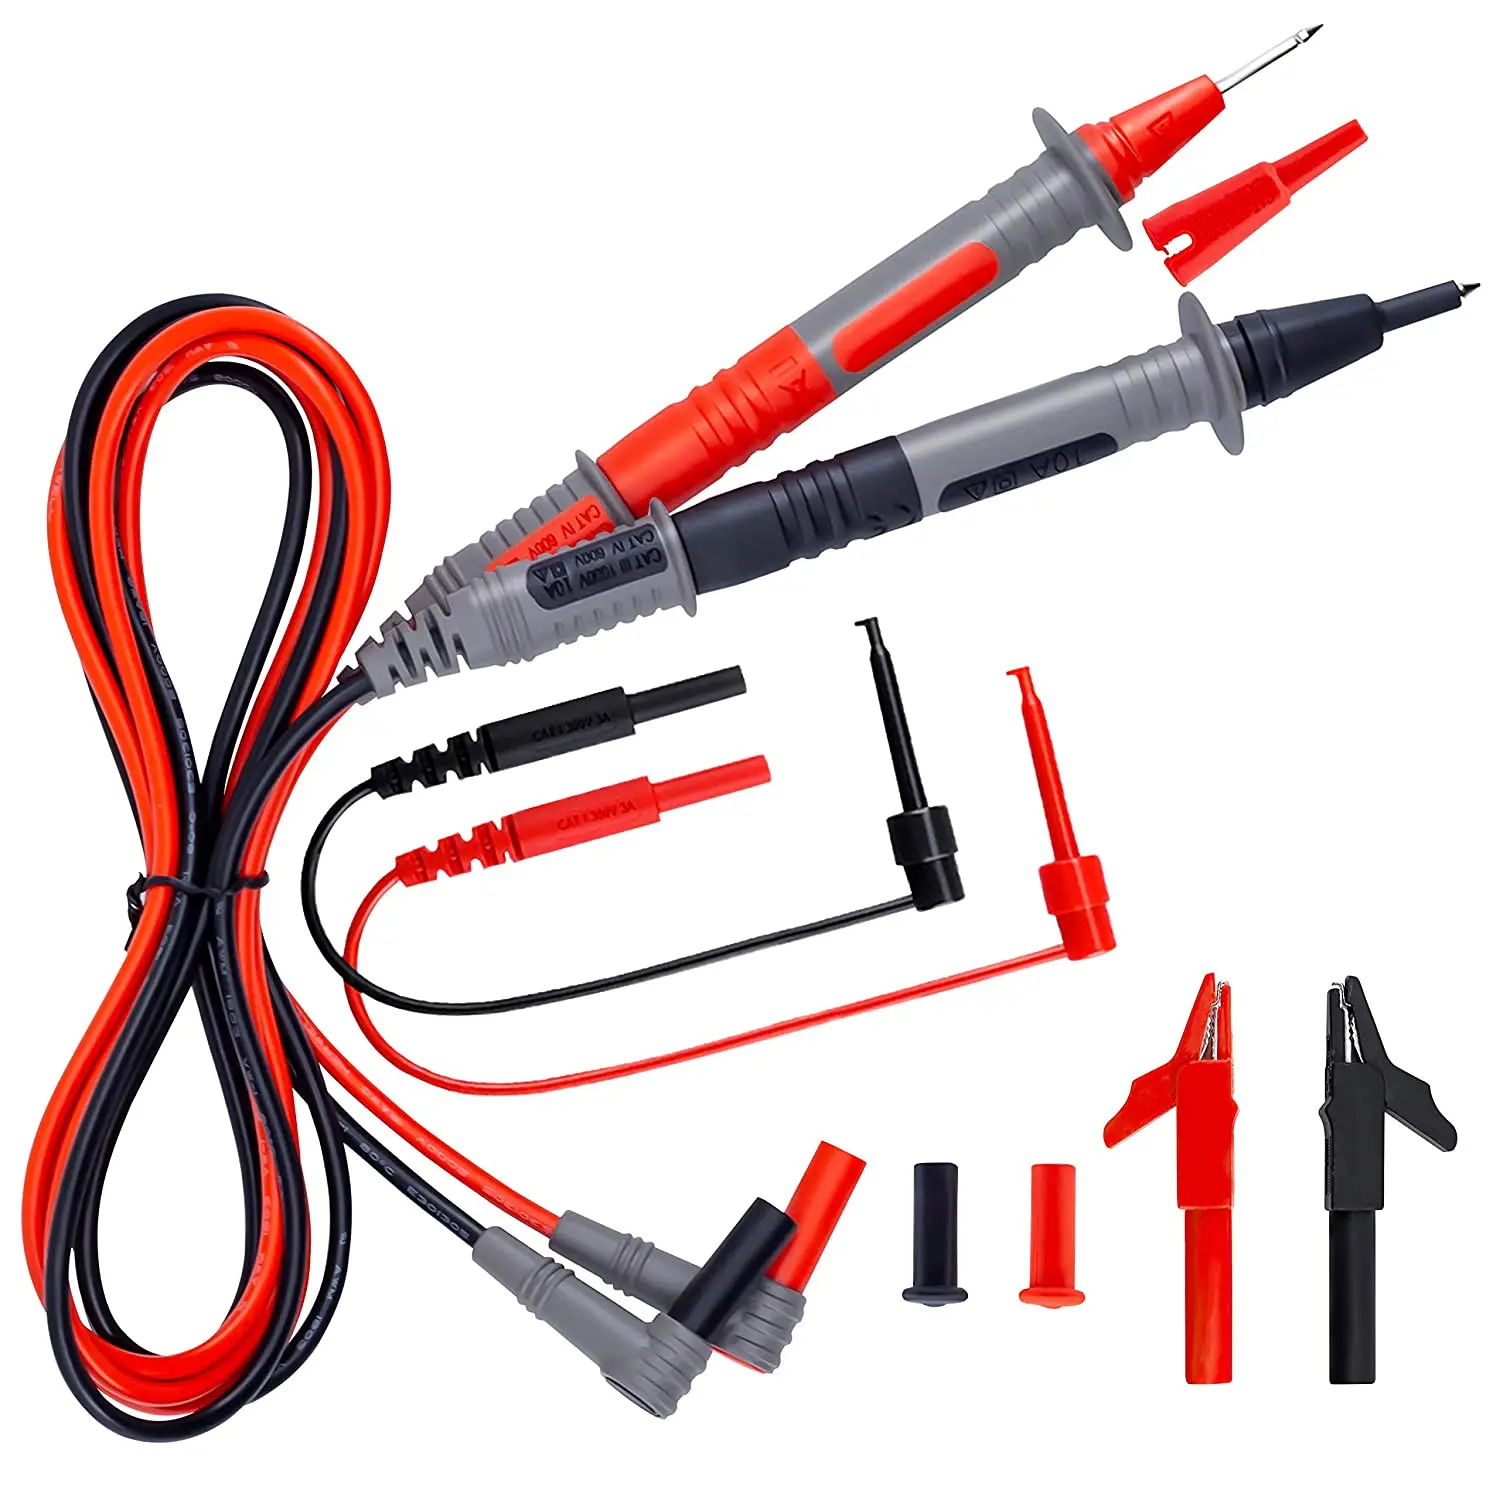 

Universal Multimeter Probe Silicone Flexible Wire Super Sharp Pen Tip Replaceable Connector Test Lead With CrocodileClip10A1000V